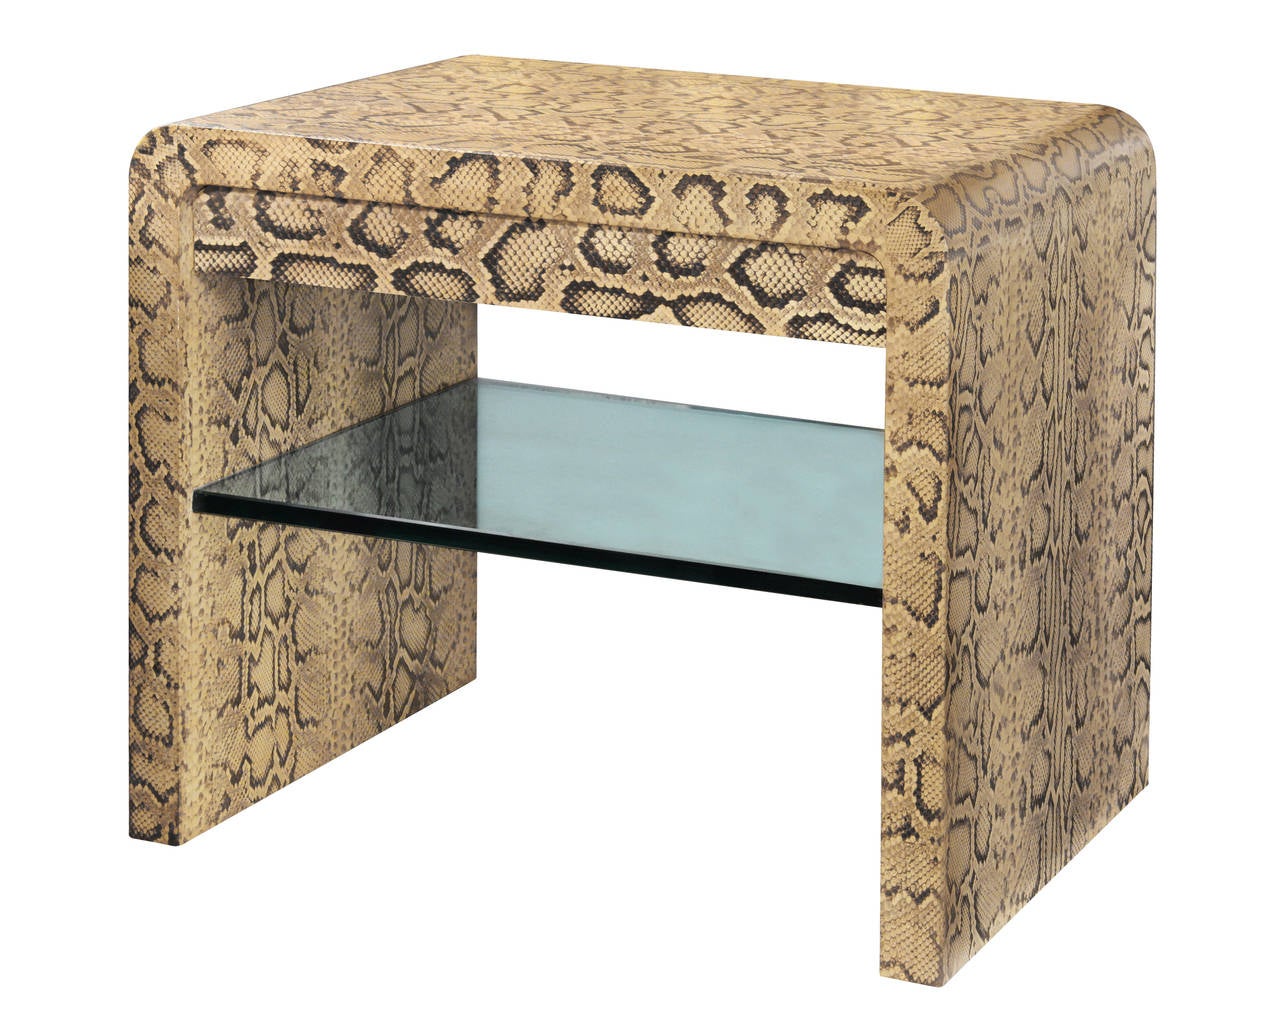 American Exceptional Waterfall Table in Python by Karl Springer